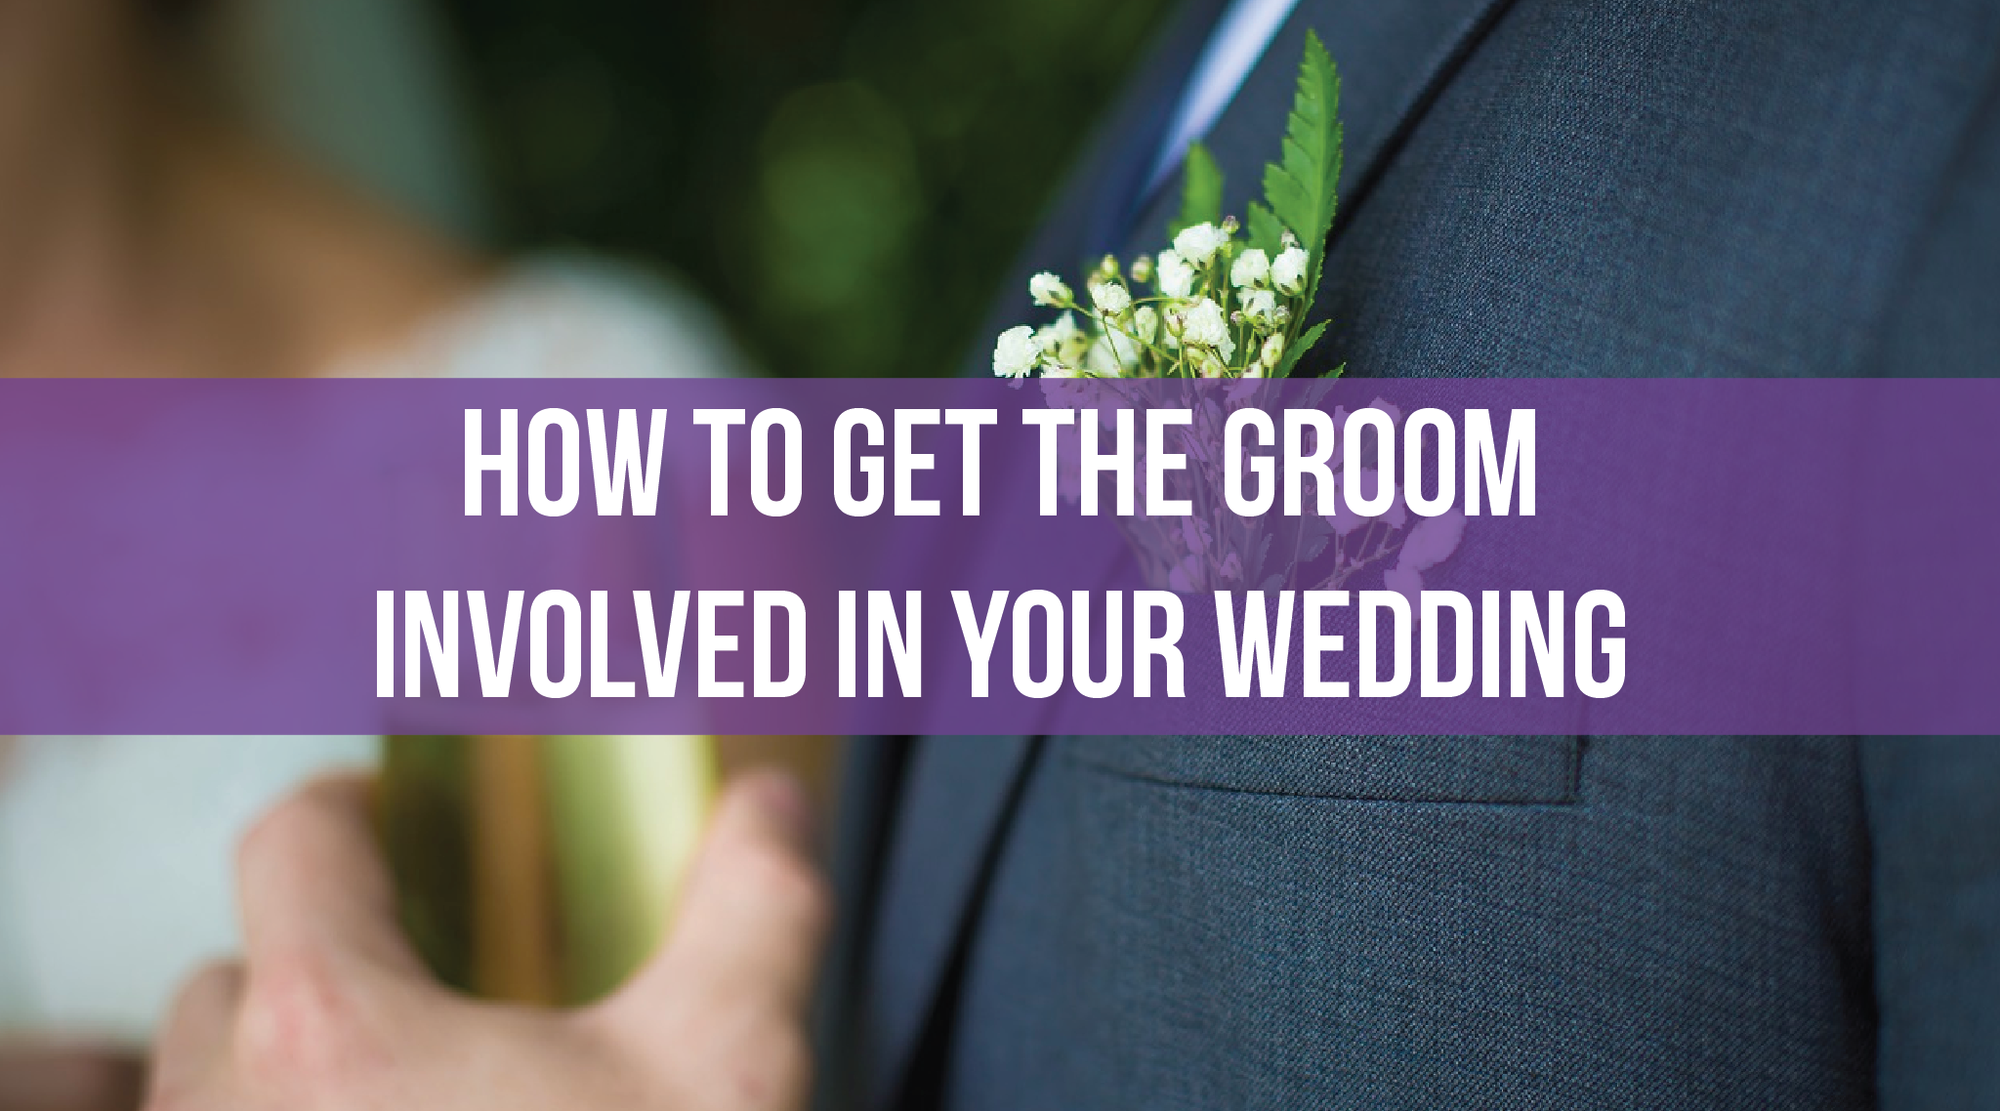 How to Get the Groom Involved in Your Wedding